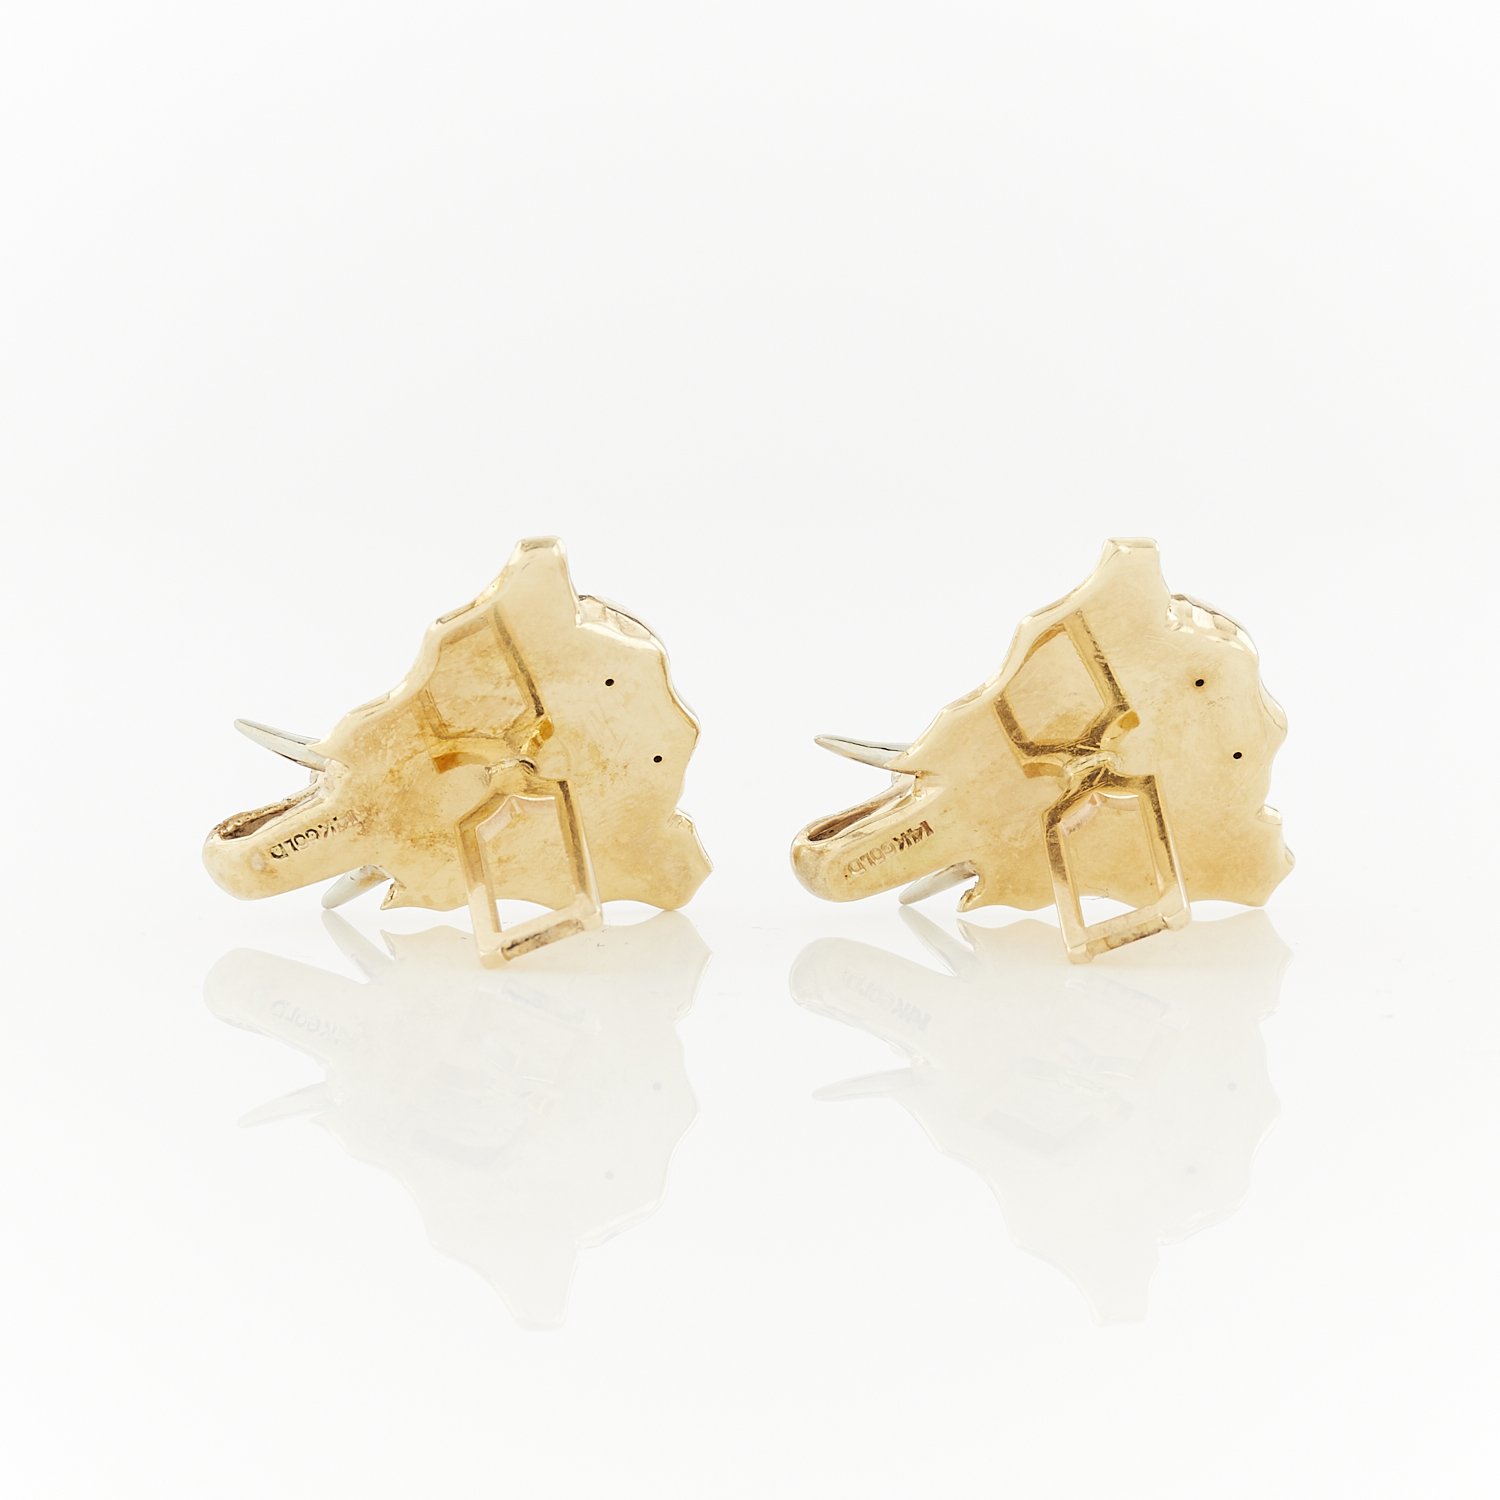 Pair of 14k Elephant Cuff Links - Image 8 of 9